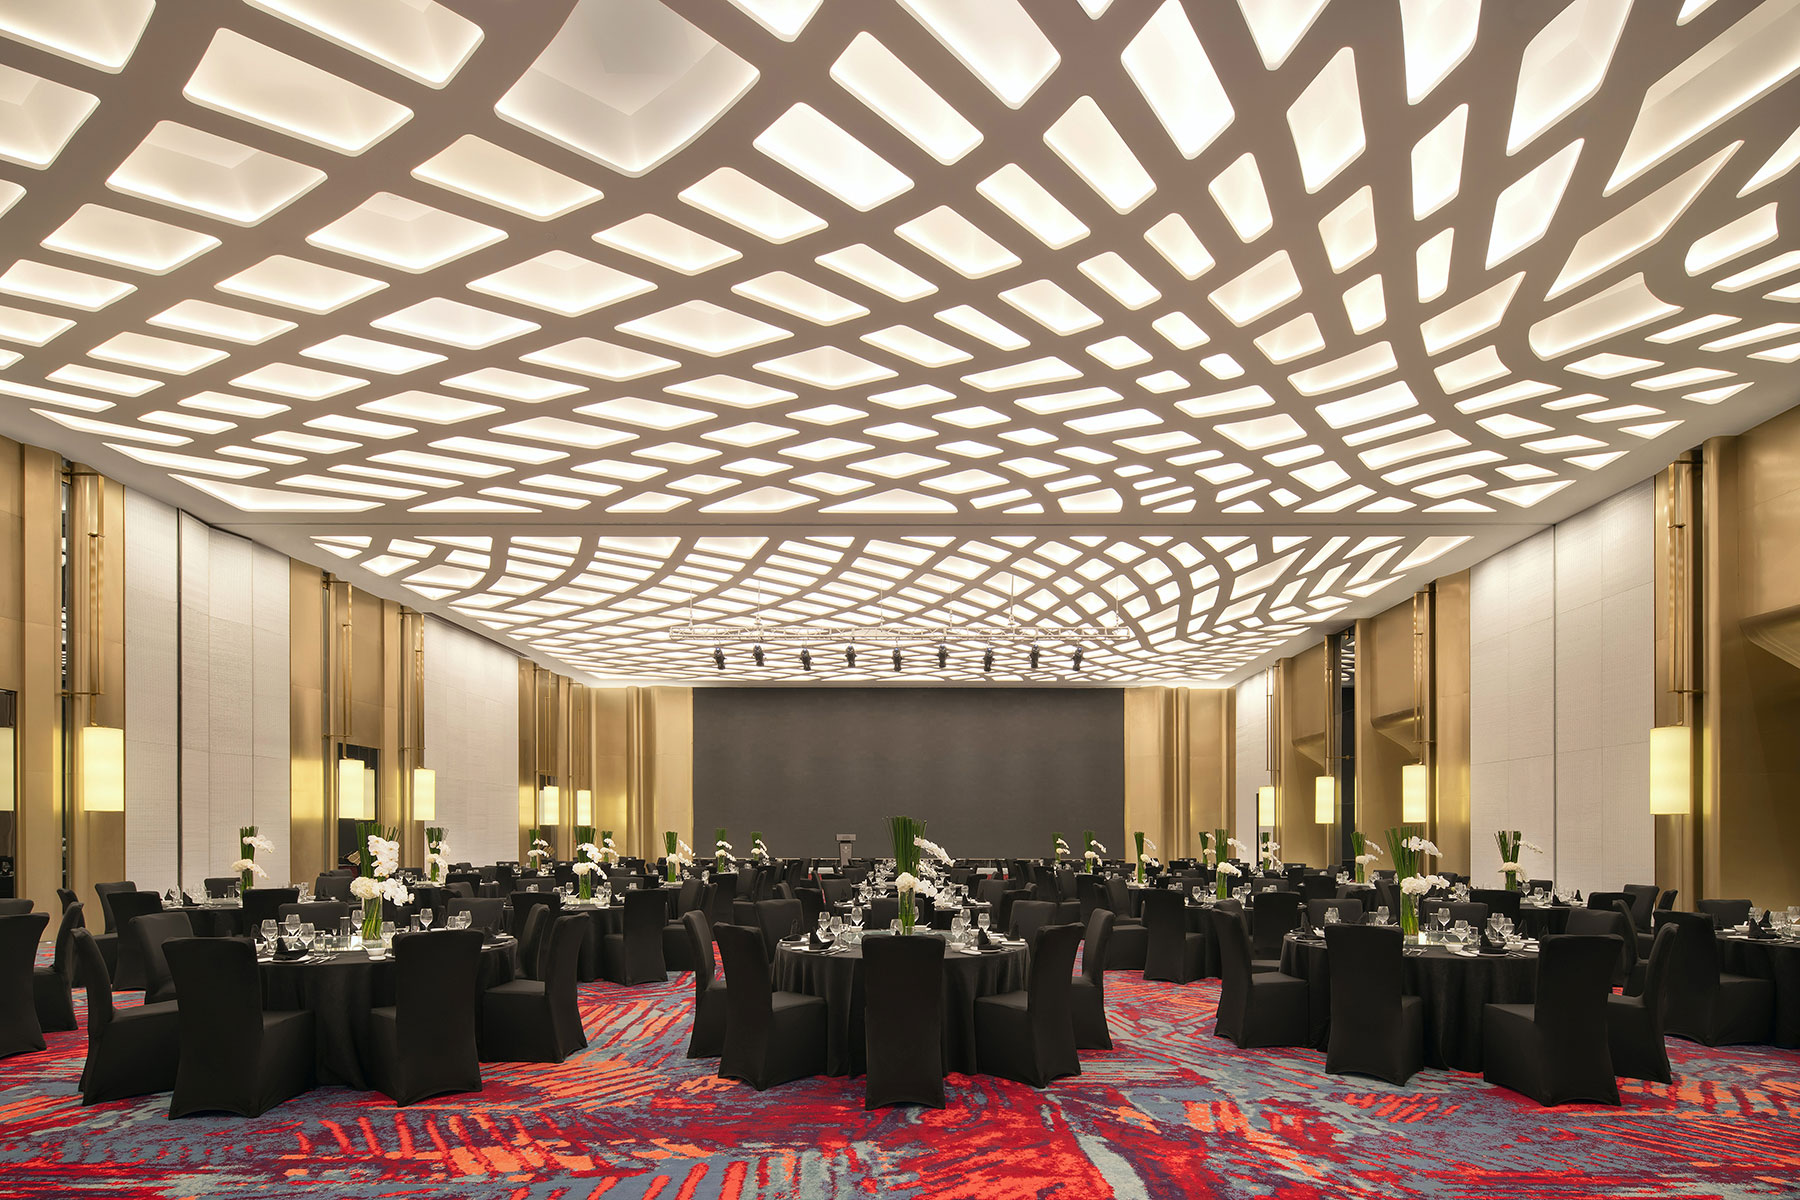 TITAN Property Awards - The Langbo Chengdu,In the Unbound Collection by Hyatt